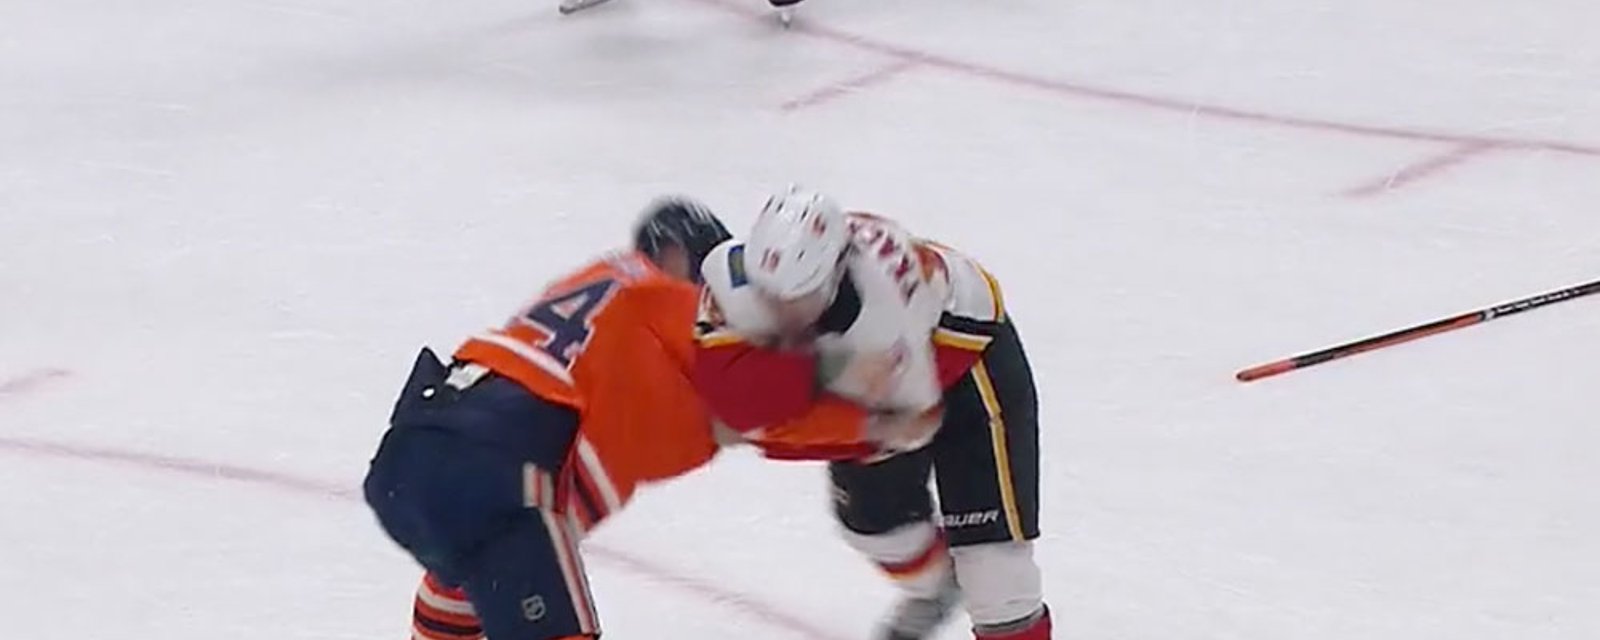 Kassian and Tkachuk drop the gloves to settle the score